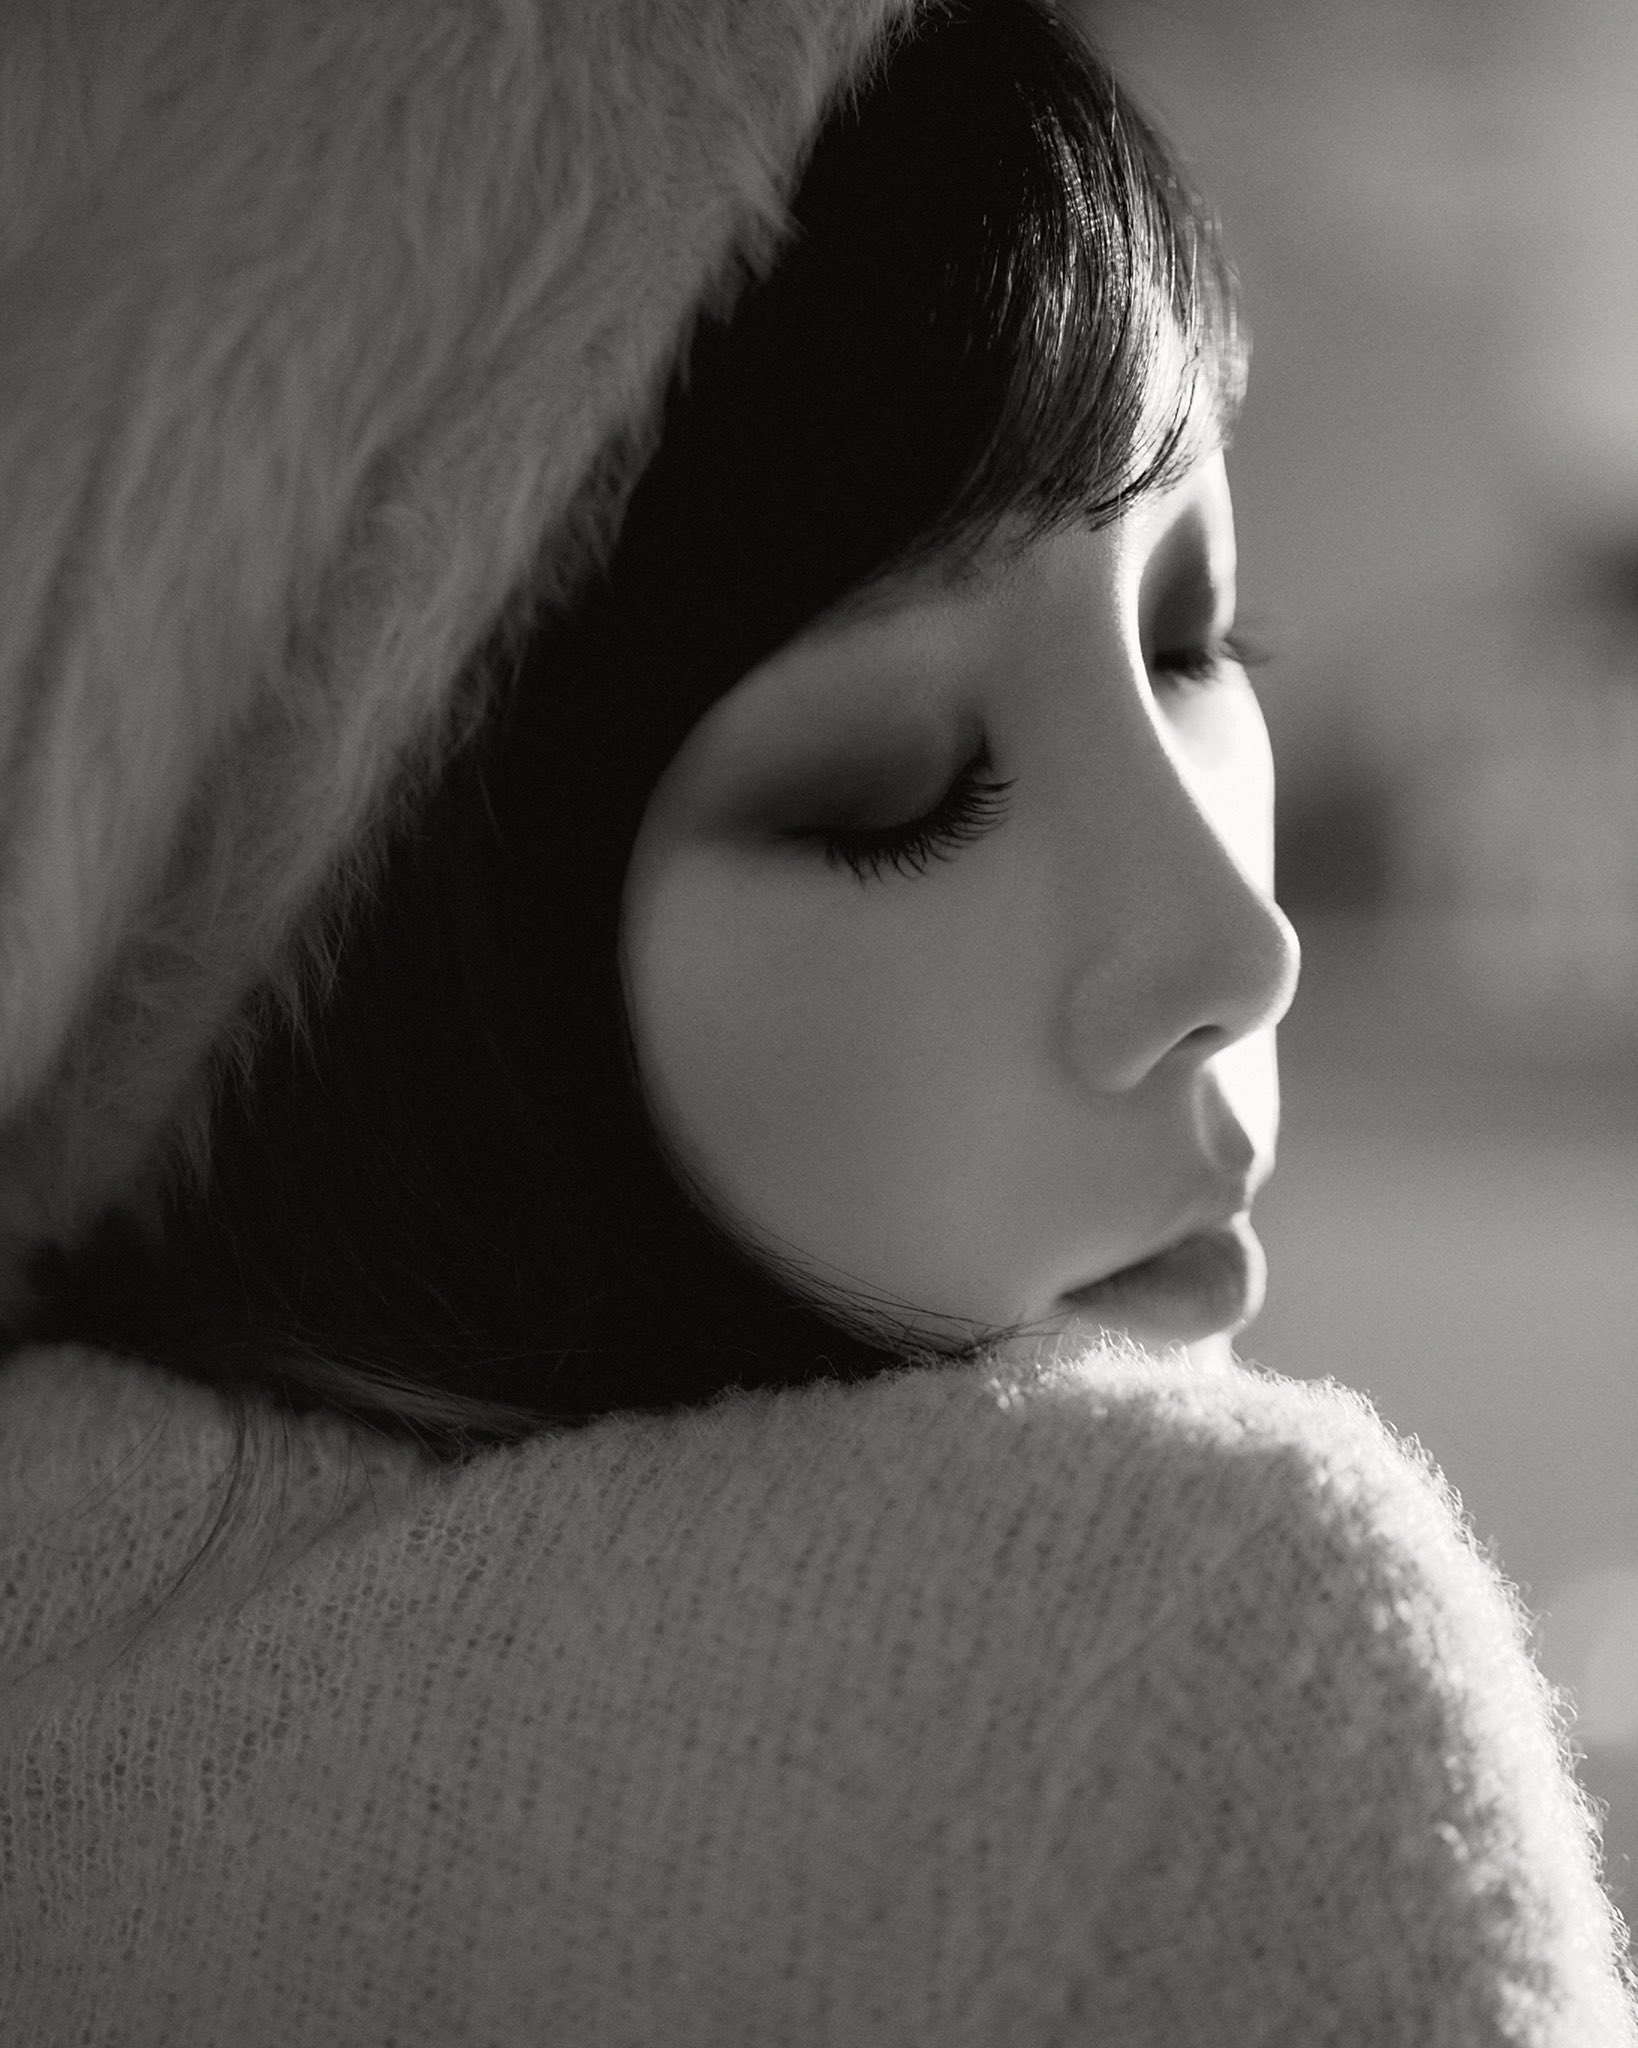 snsd-taeyeon-unveils-comeback-teaser-for-4th-mini-album-what-do-i-call-you-to-be-released-on-dec-15